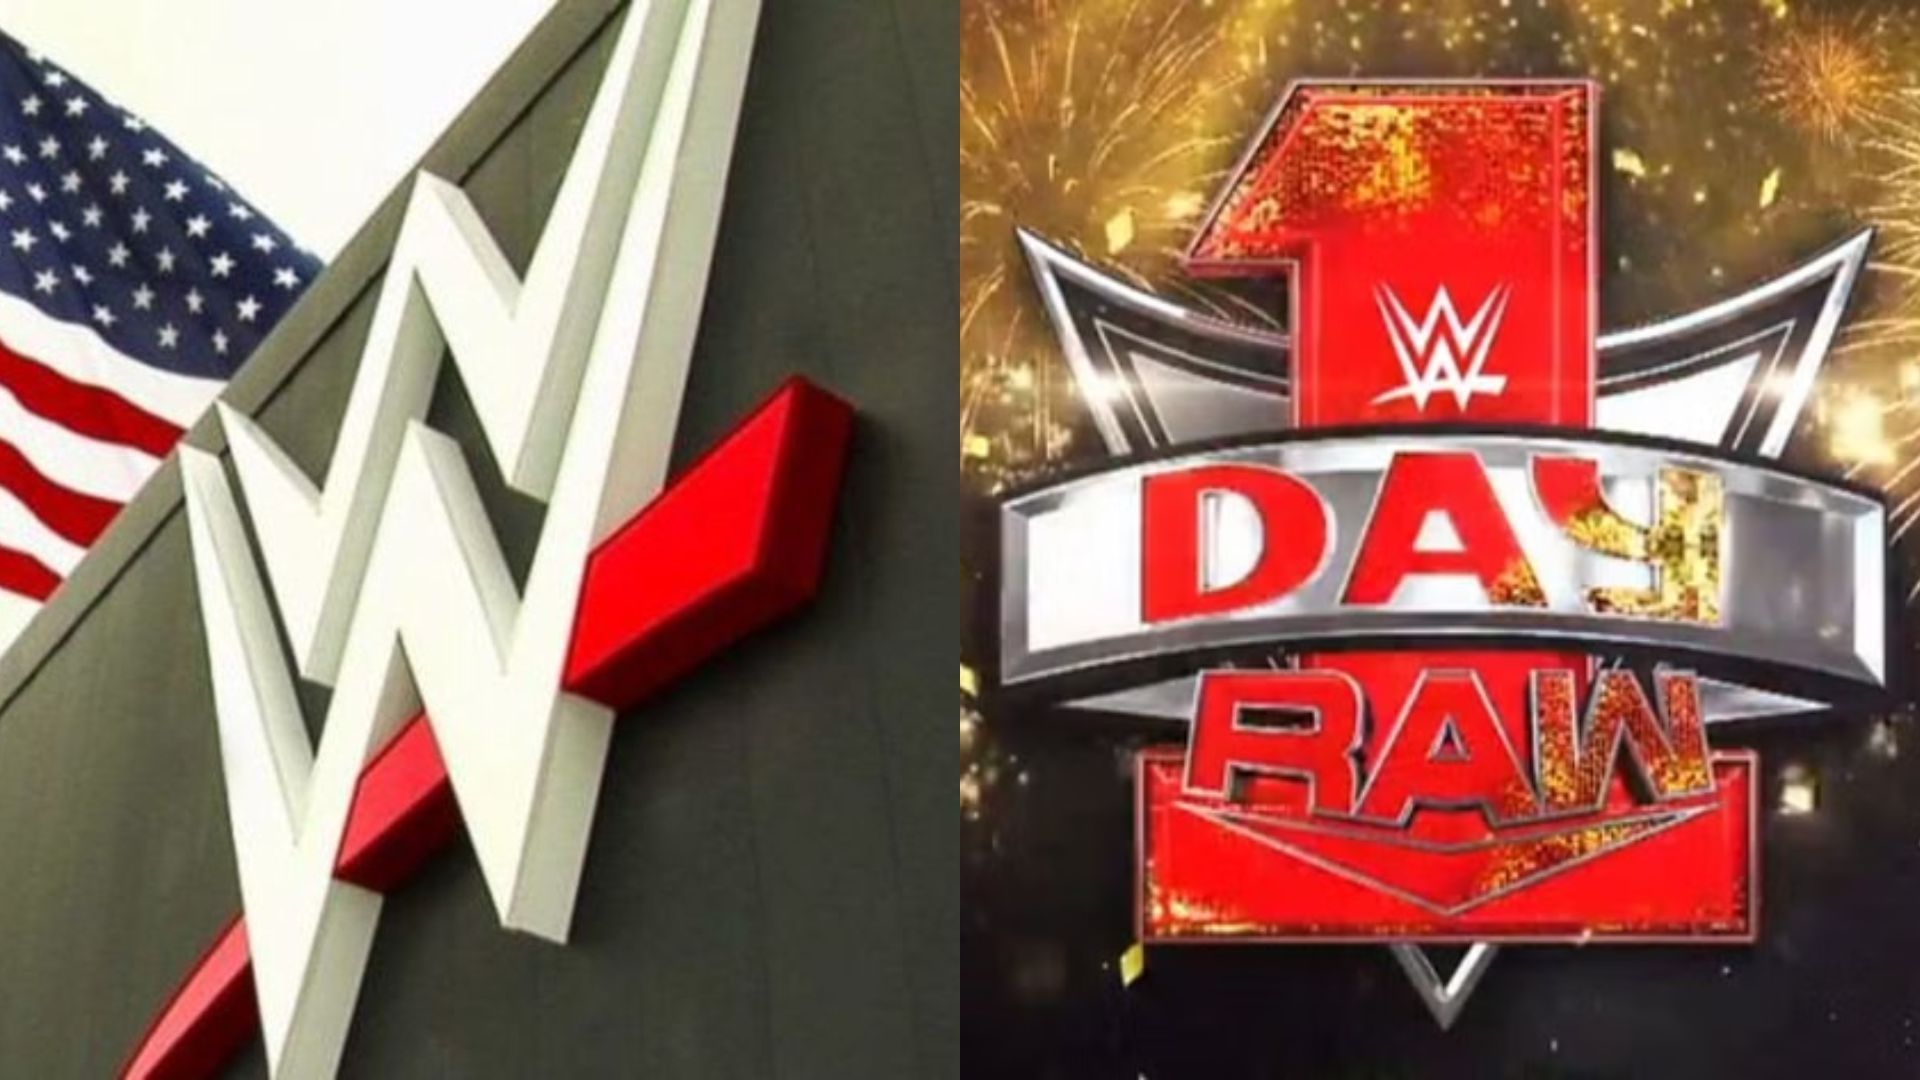 WWE held a special Day 1 edition of RAW to kick off the new year